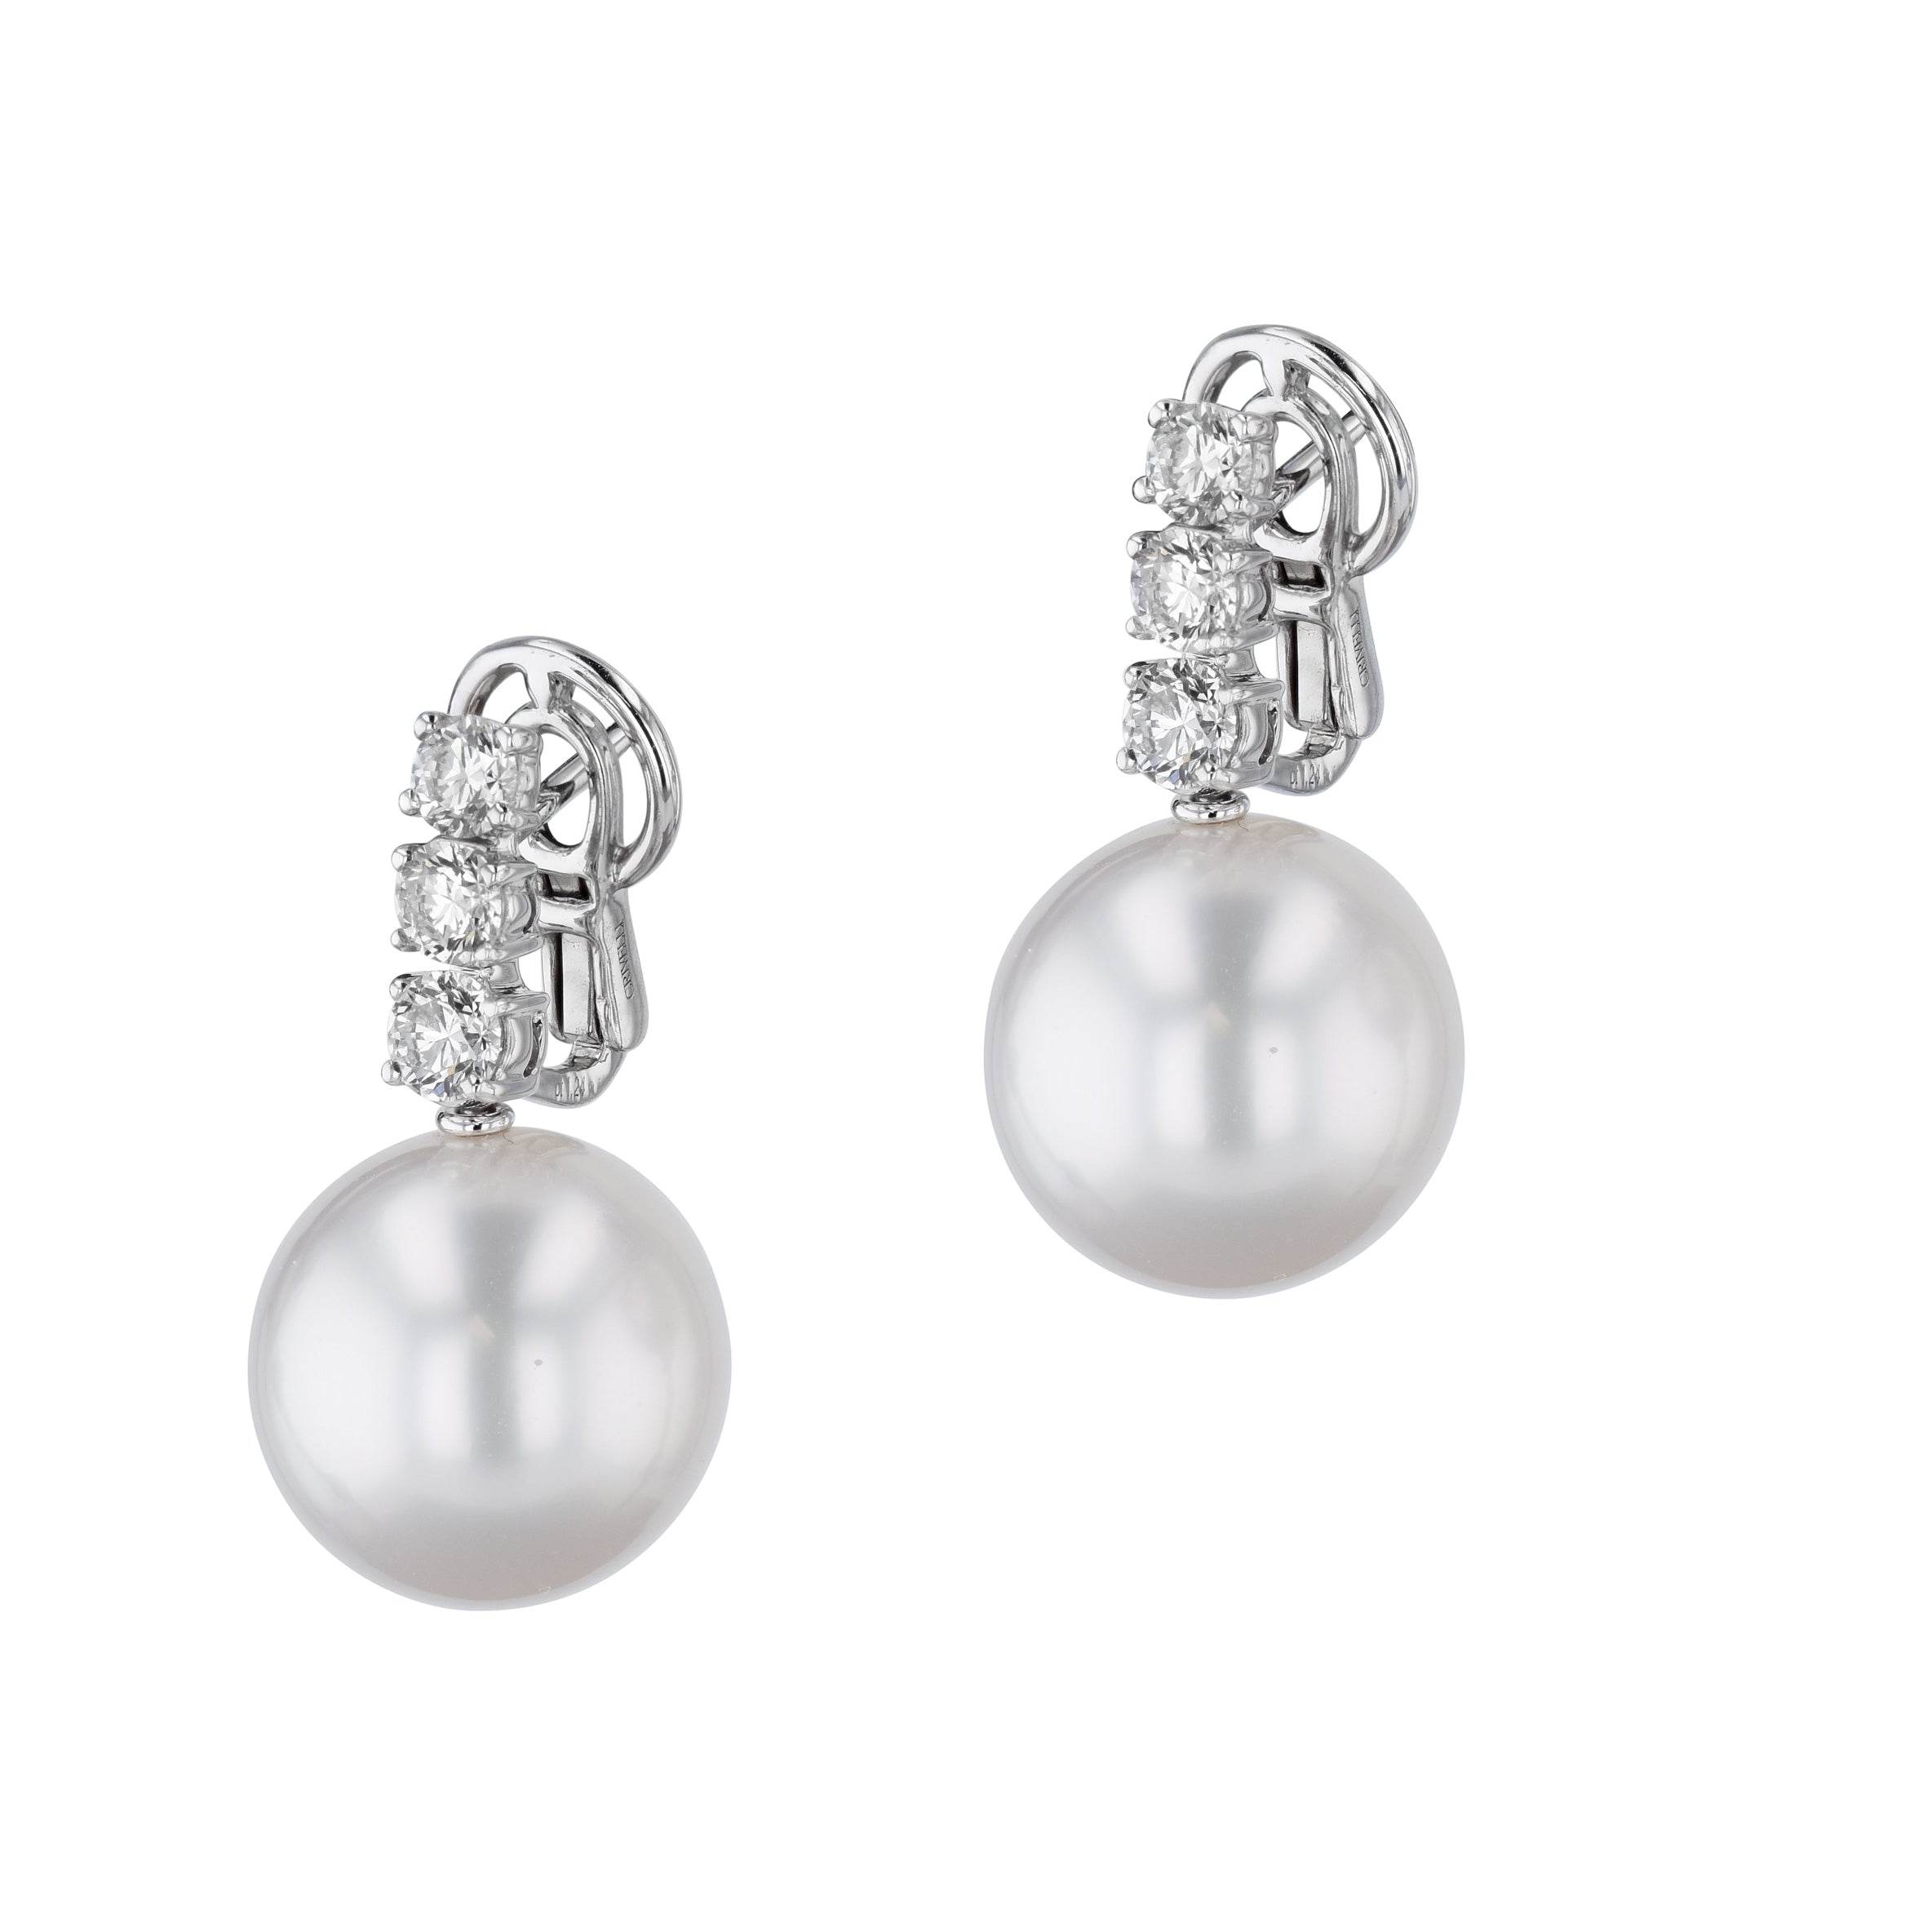 Pearl White Gold and Diamond Drop Earrings Earrings Curated by H